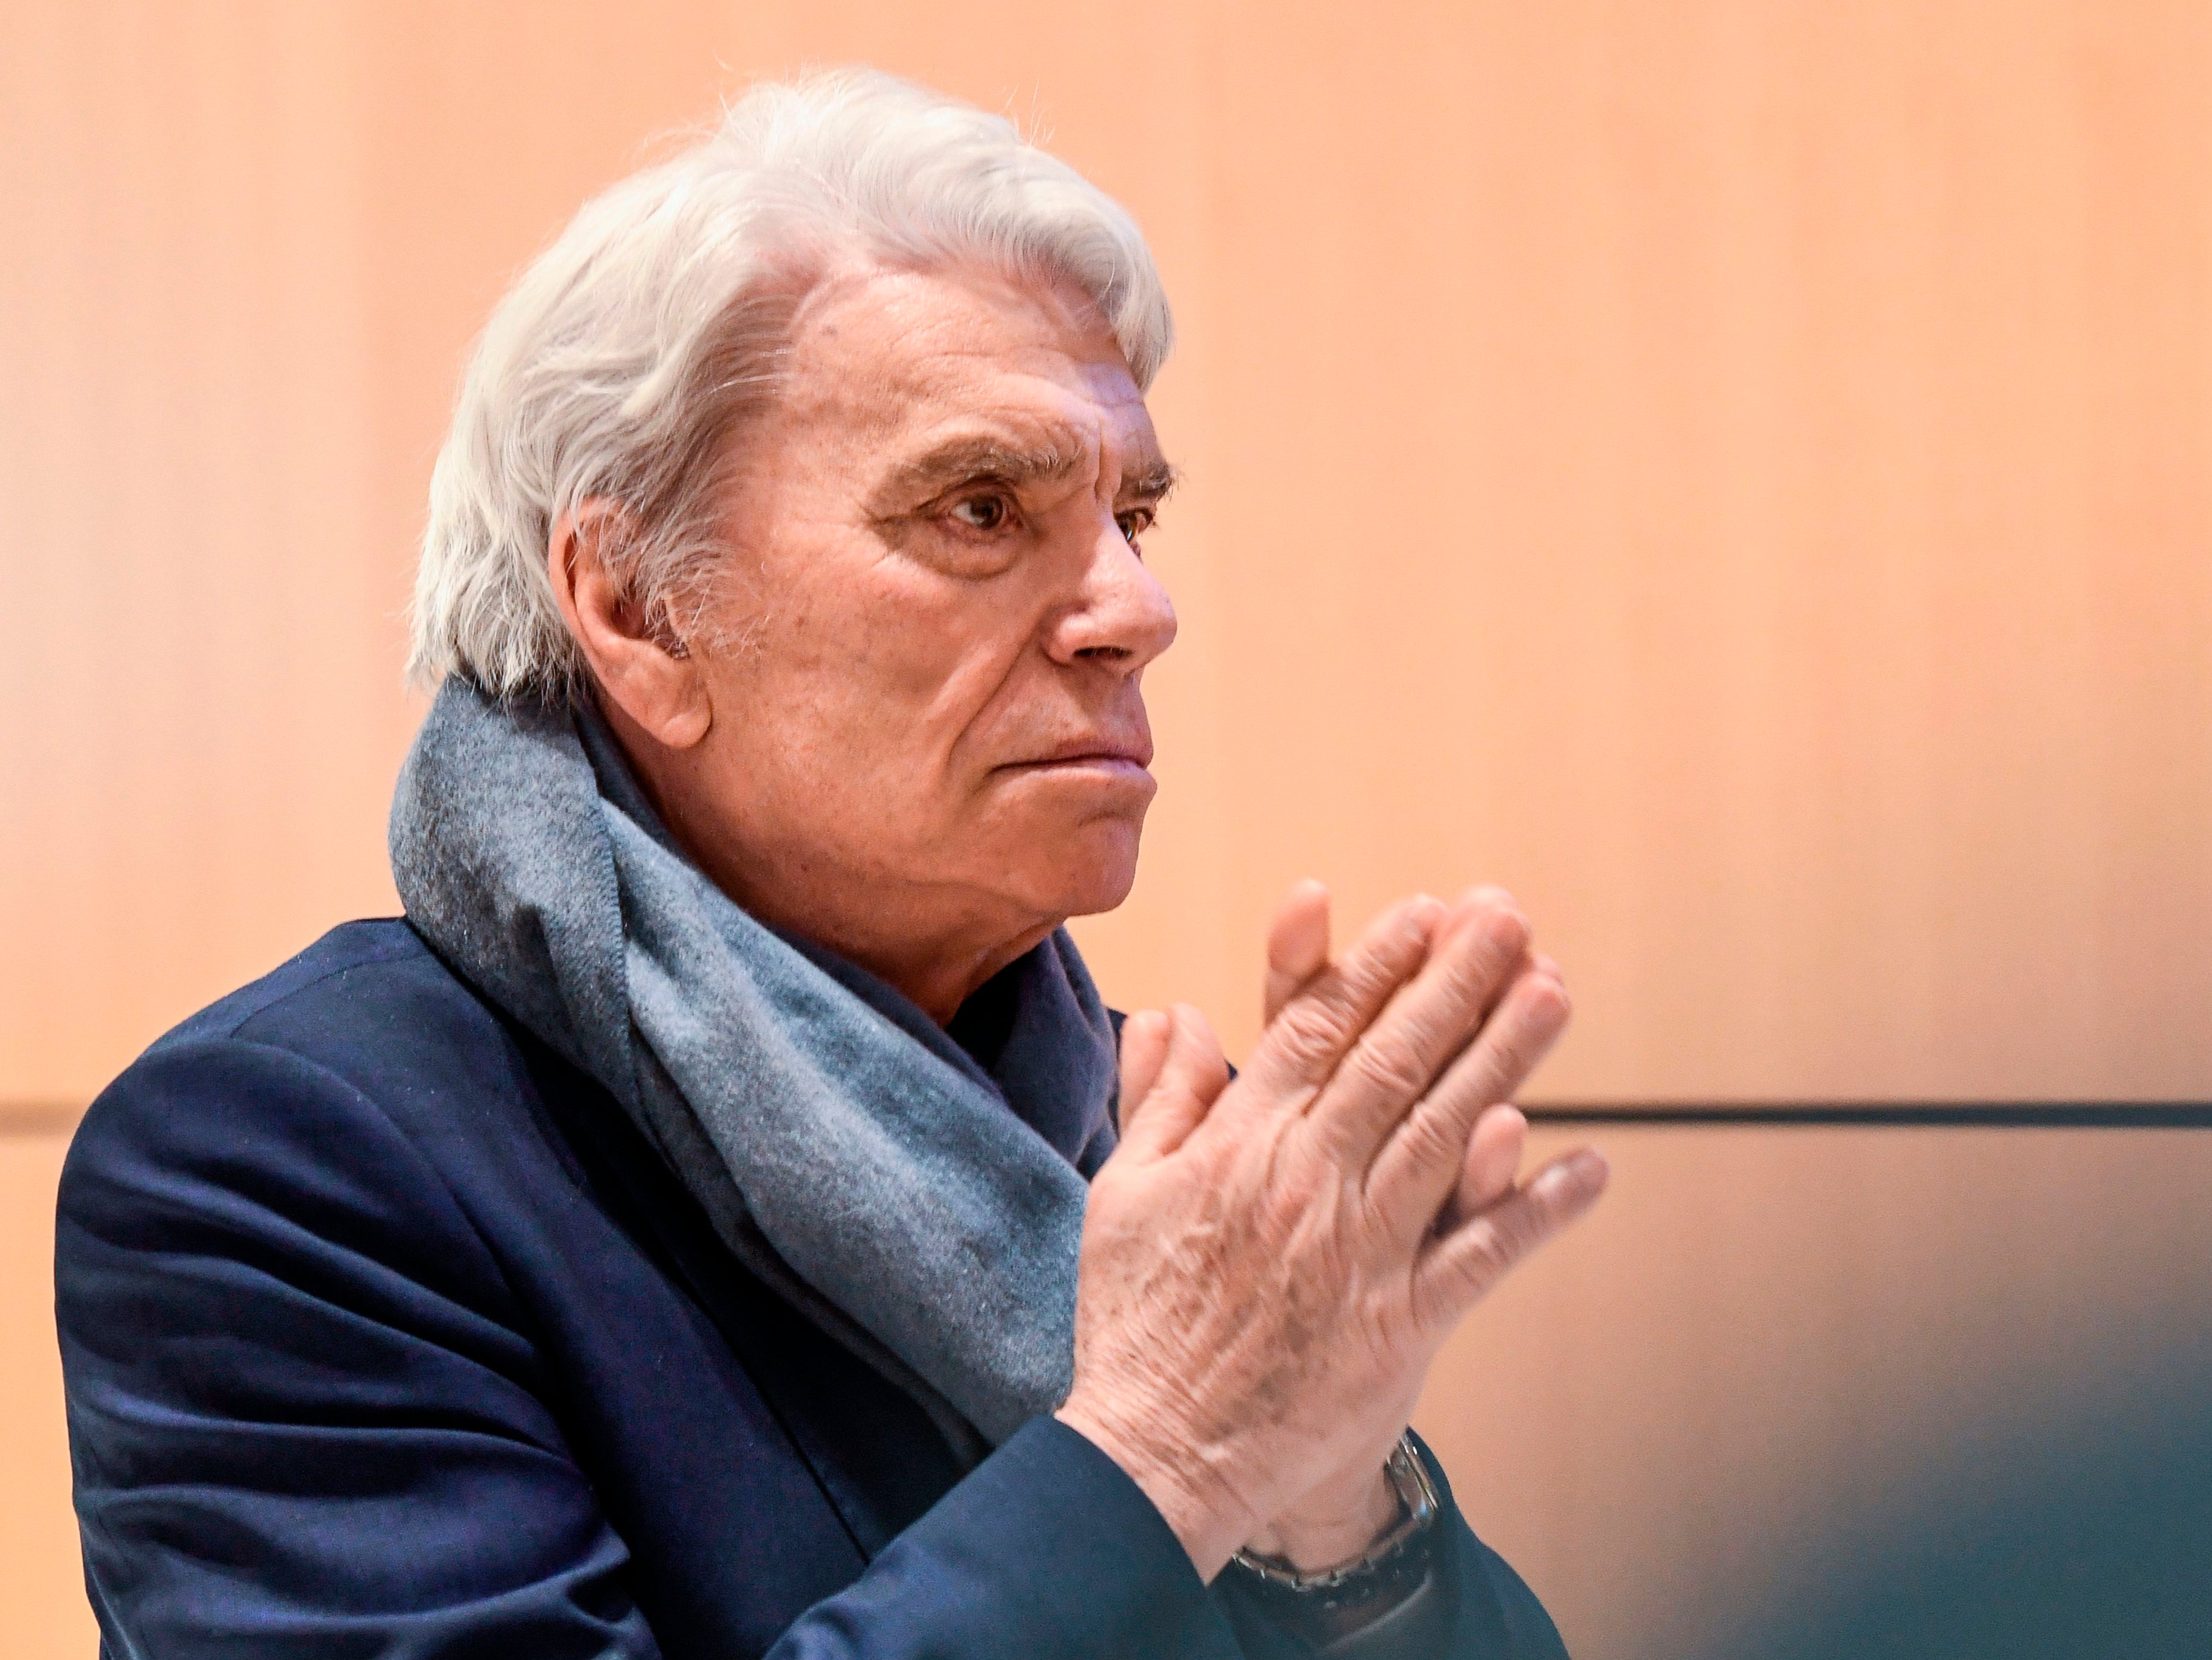 Tapie during his trial in Paris, April 2019. He was acquitted of defrauding the state but prosecutors appealed that decision, leading to a new trial that began in May, with Tapie already seriously ill. A verdict had not yet been handed down when he died